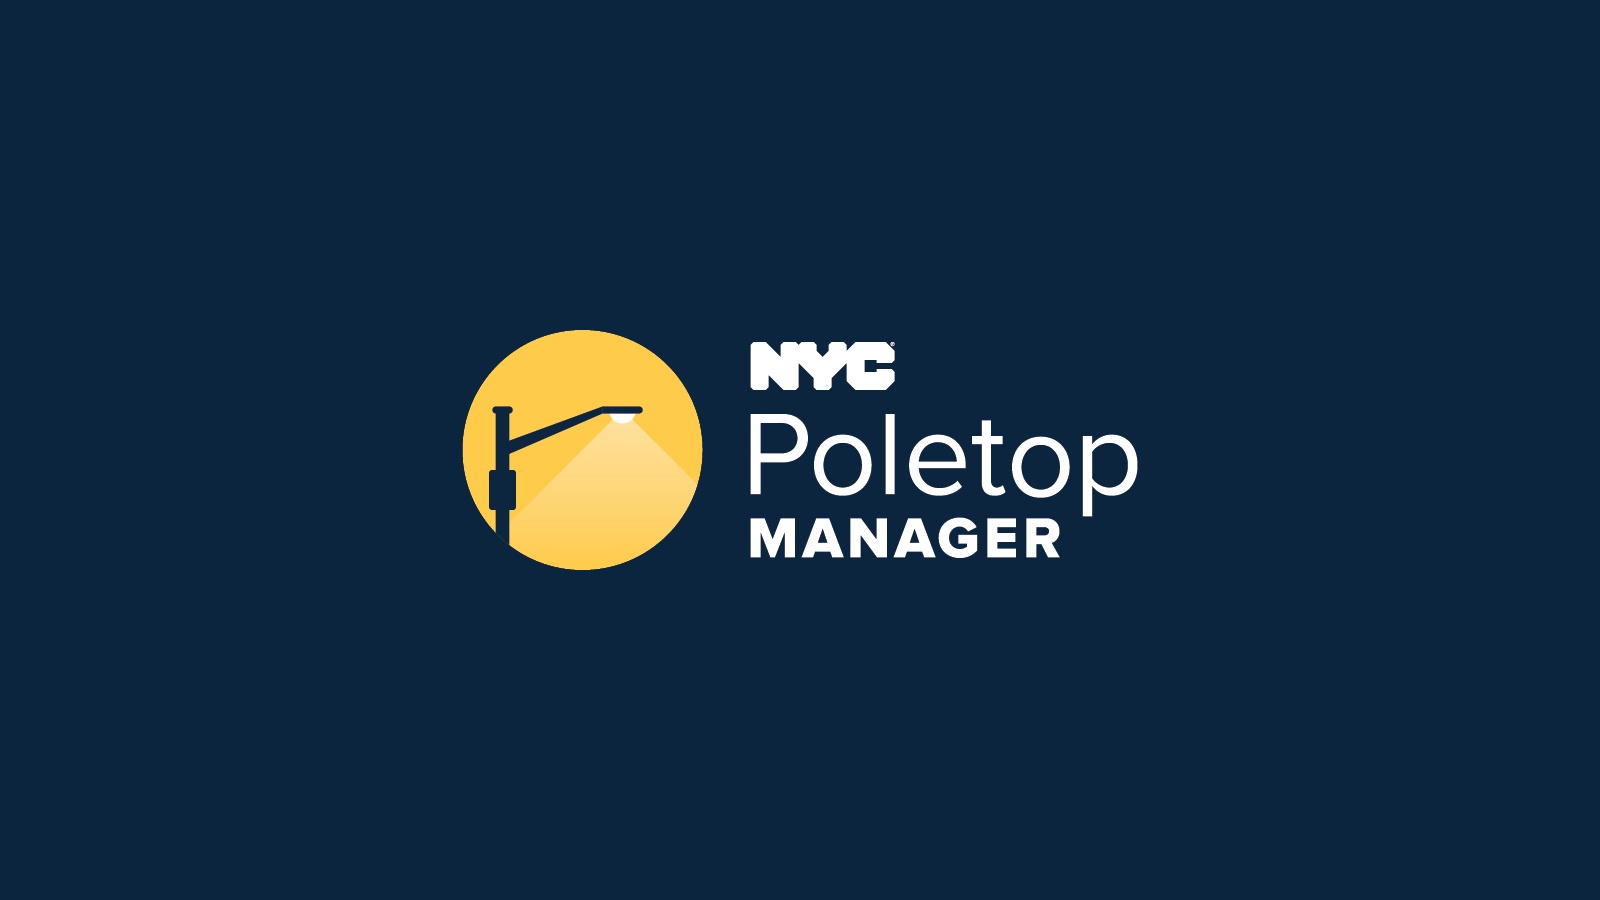 NYC Poletop Manager logo